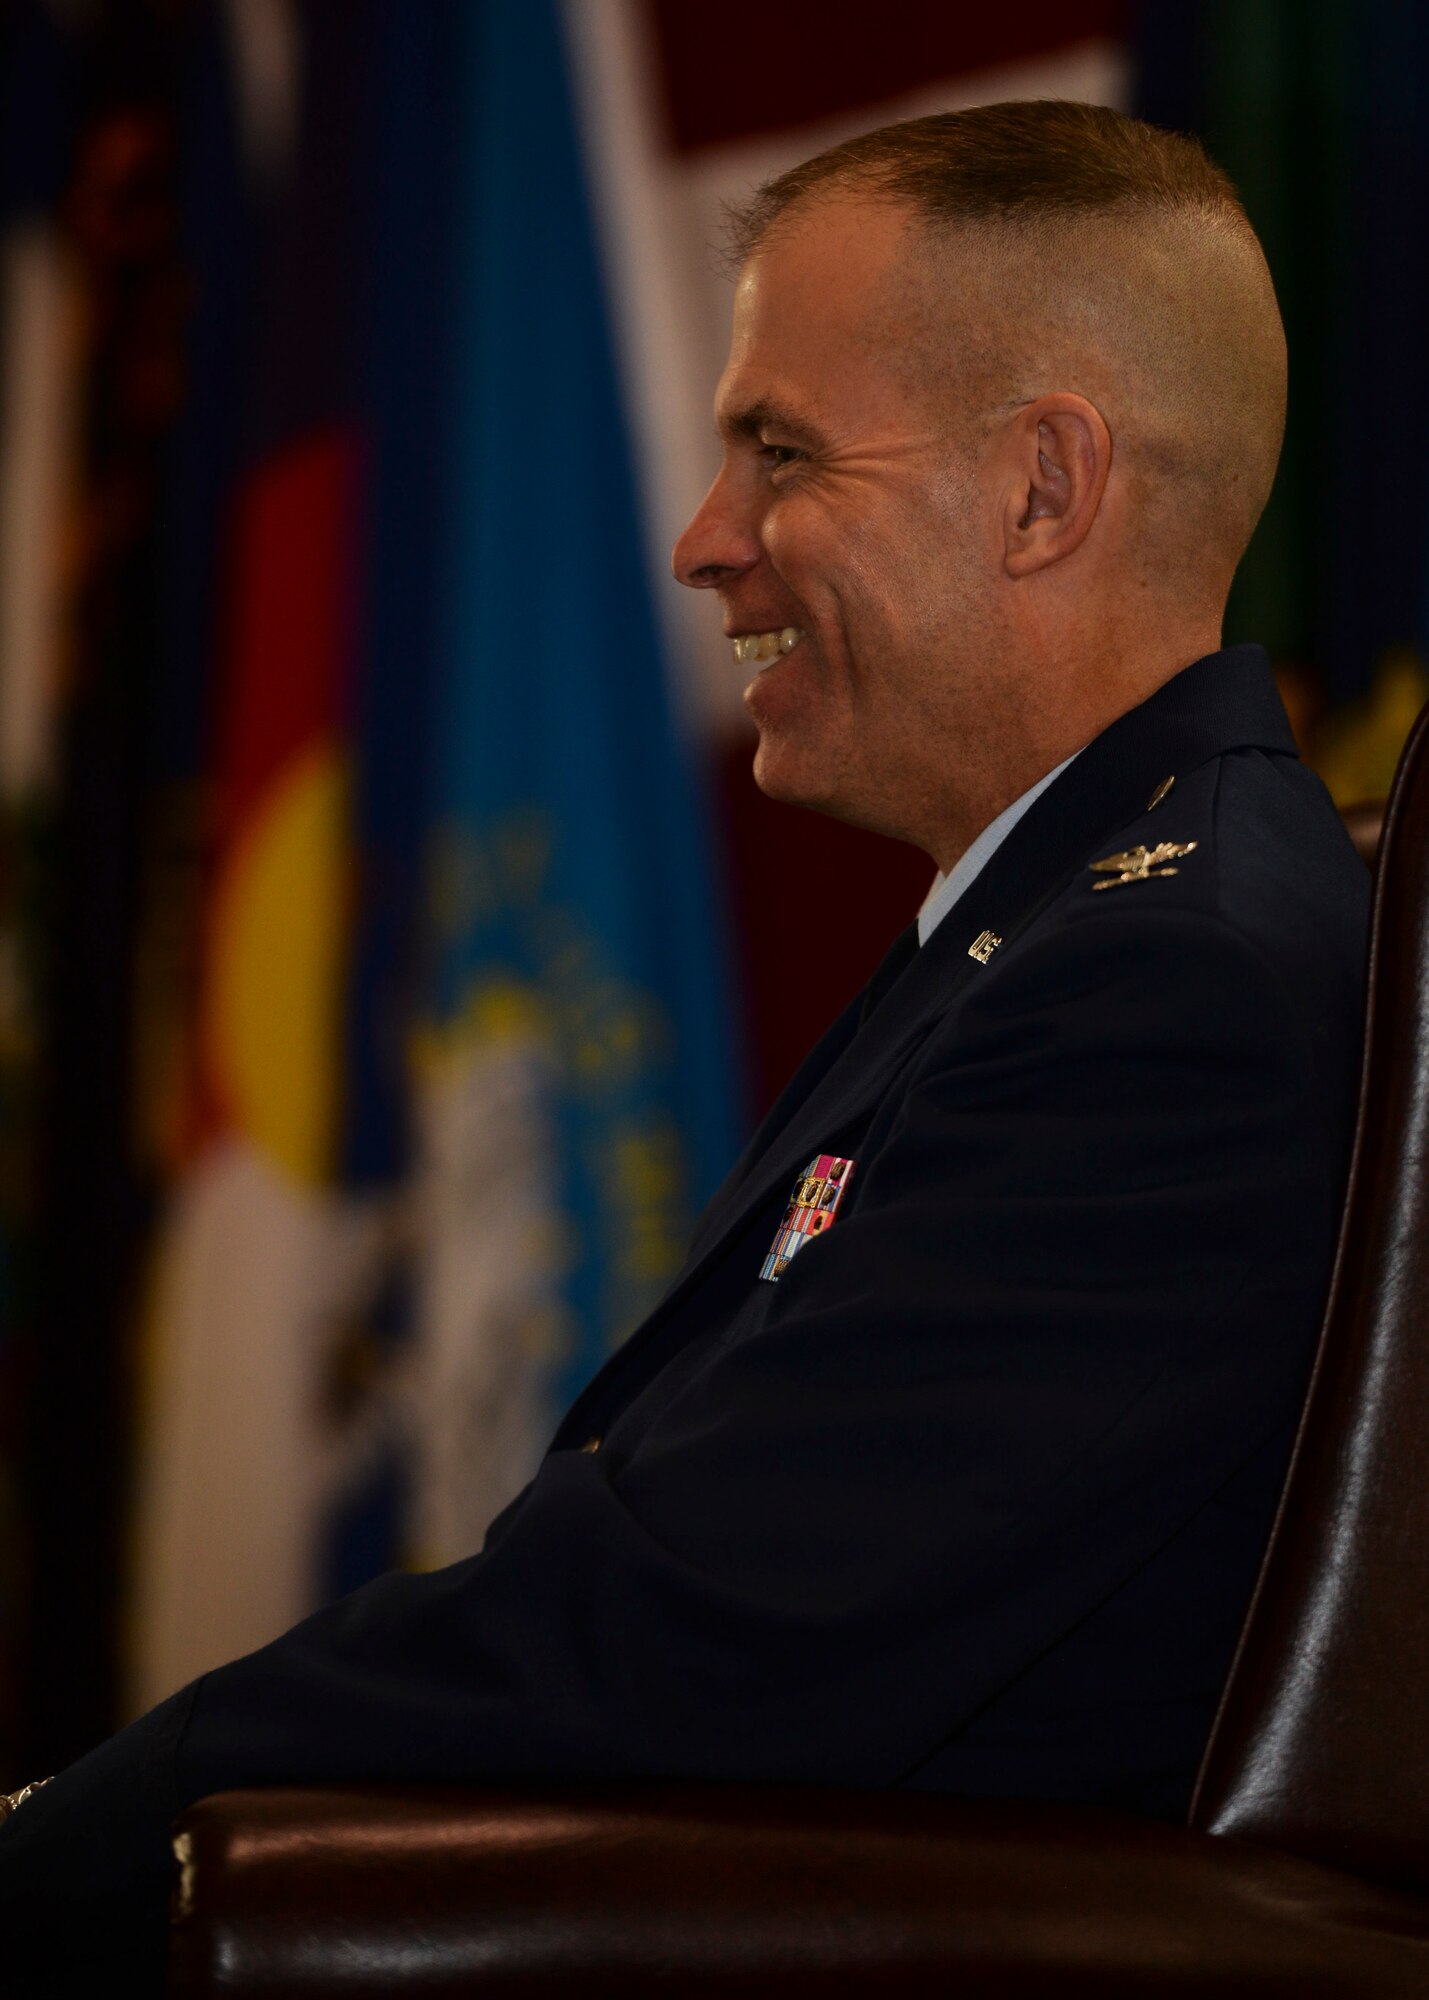 Col. Michael Lutton, previous 91st Missile Wing commander, laughs during his promotion ceremony at Minot Air Force Base, N.D., June 17, 2016. Lutton was selected to be promoted in December 2015. (U.S. Air Force photo/Airman 1st J.T. Armstrong)